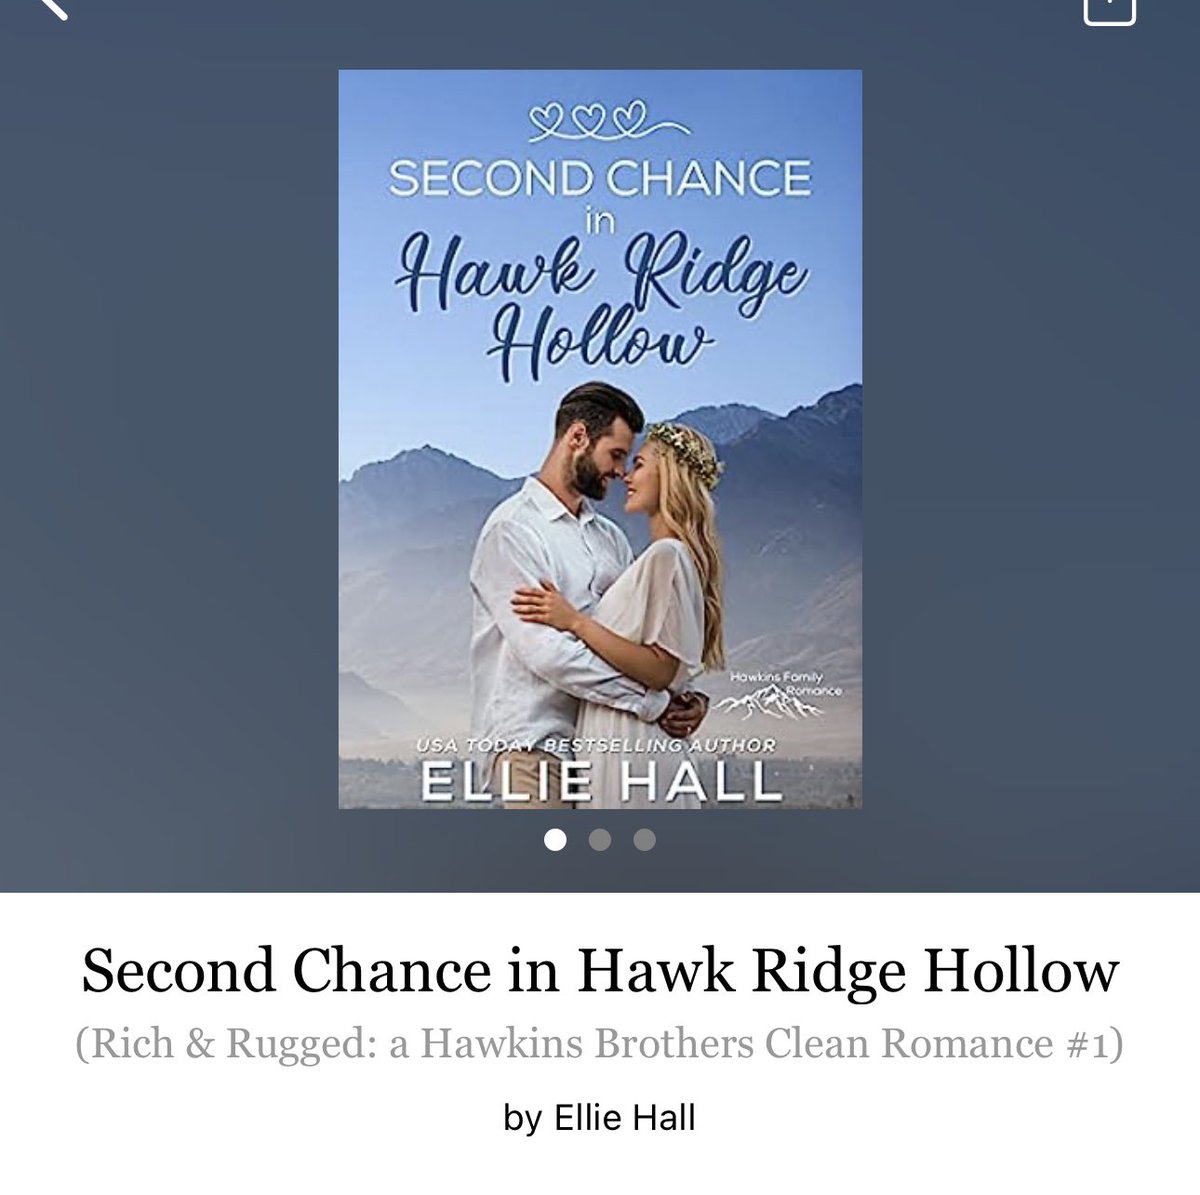 Second Chance in Hawk Ridge Hollow by Ellie Hall 

#SecondChanceInHawkRidgeHollow by #EllieHall #5118 #14chapters #128pages #july2023 #661of400 #Series #Audiobook #3for1 #3houraudiobook #Series #RichAndRuggedAHawkinsBrothersCleanRomance #clearingoffreadingshelves #whatsnext